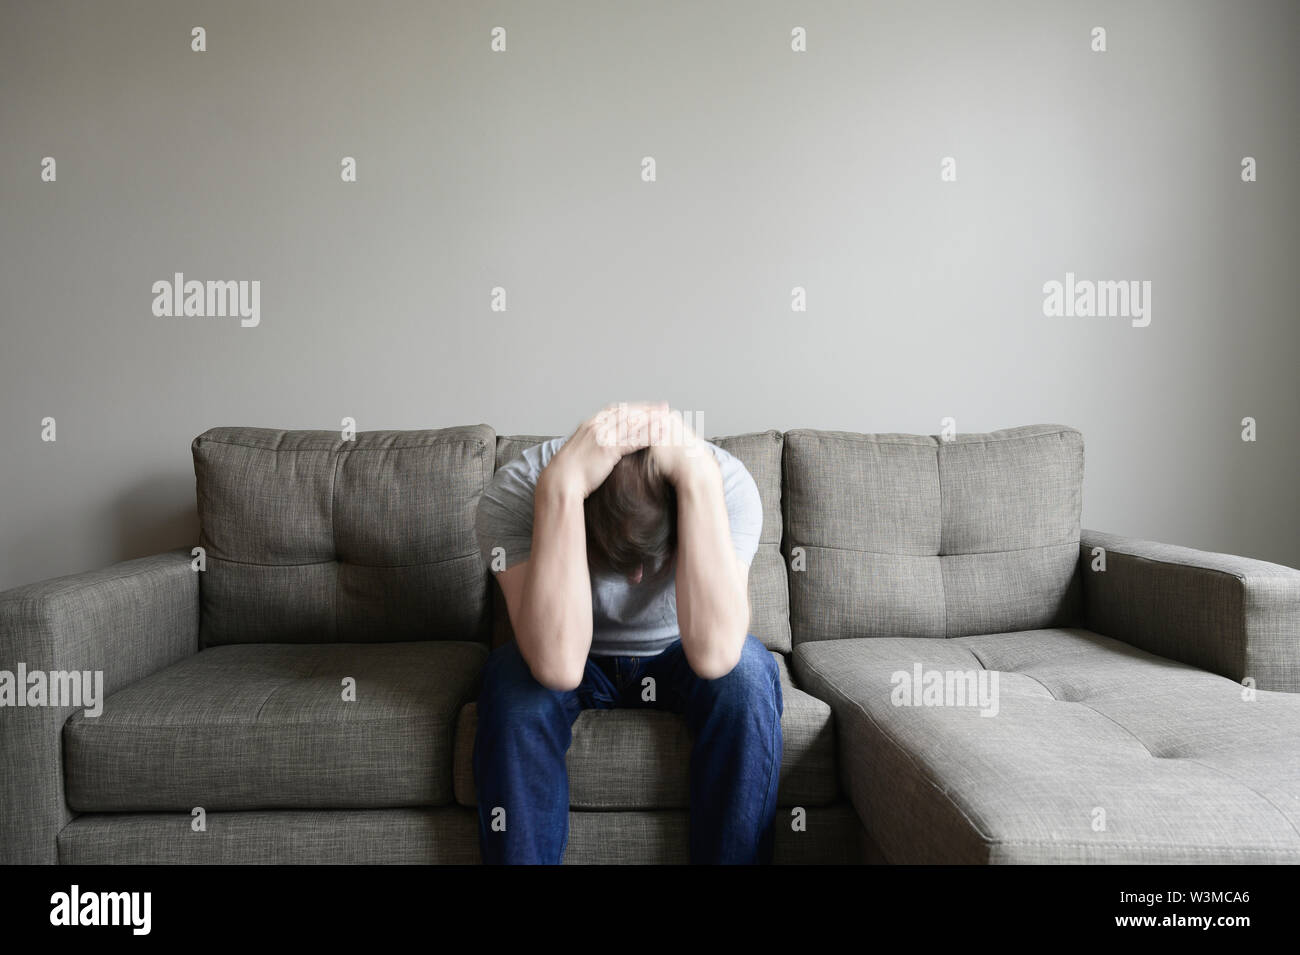 Depressed mature man sitting on couch Stock Photo